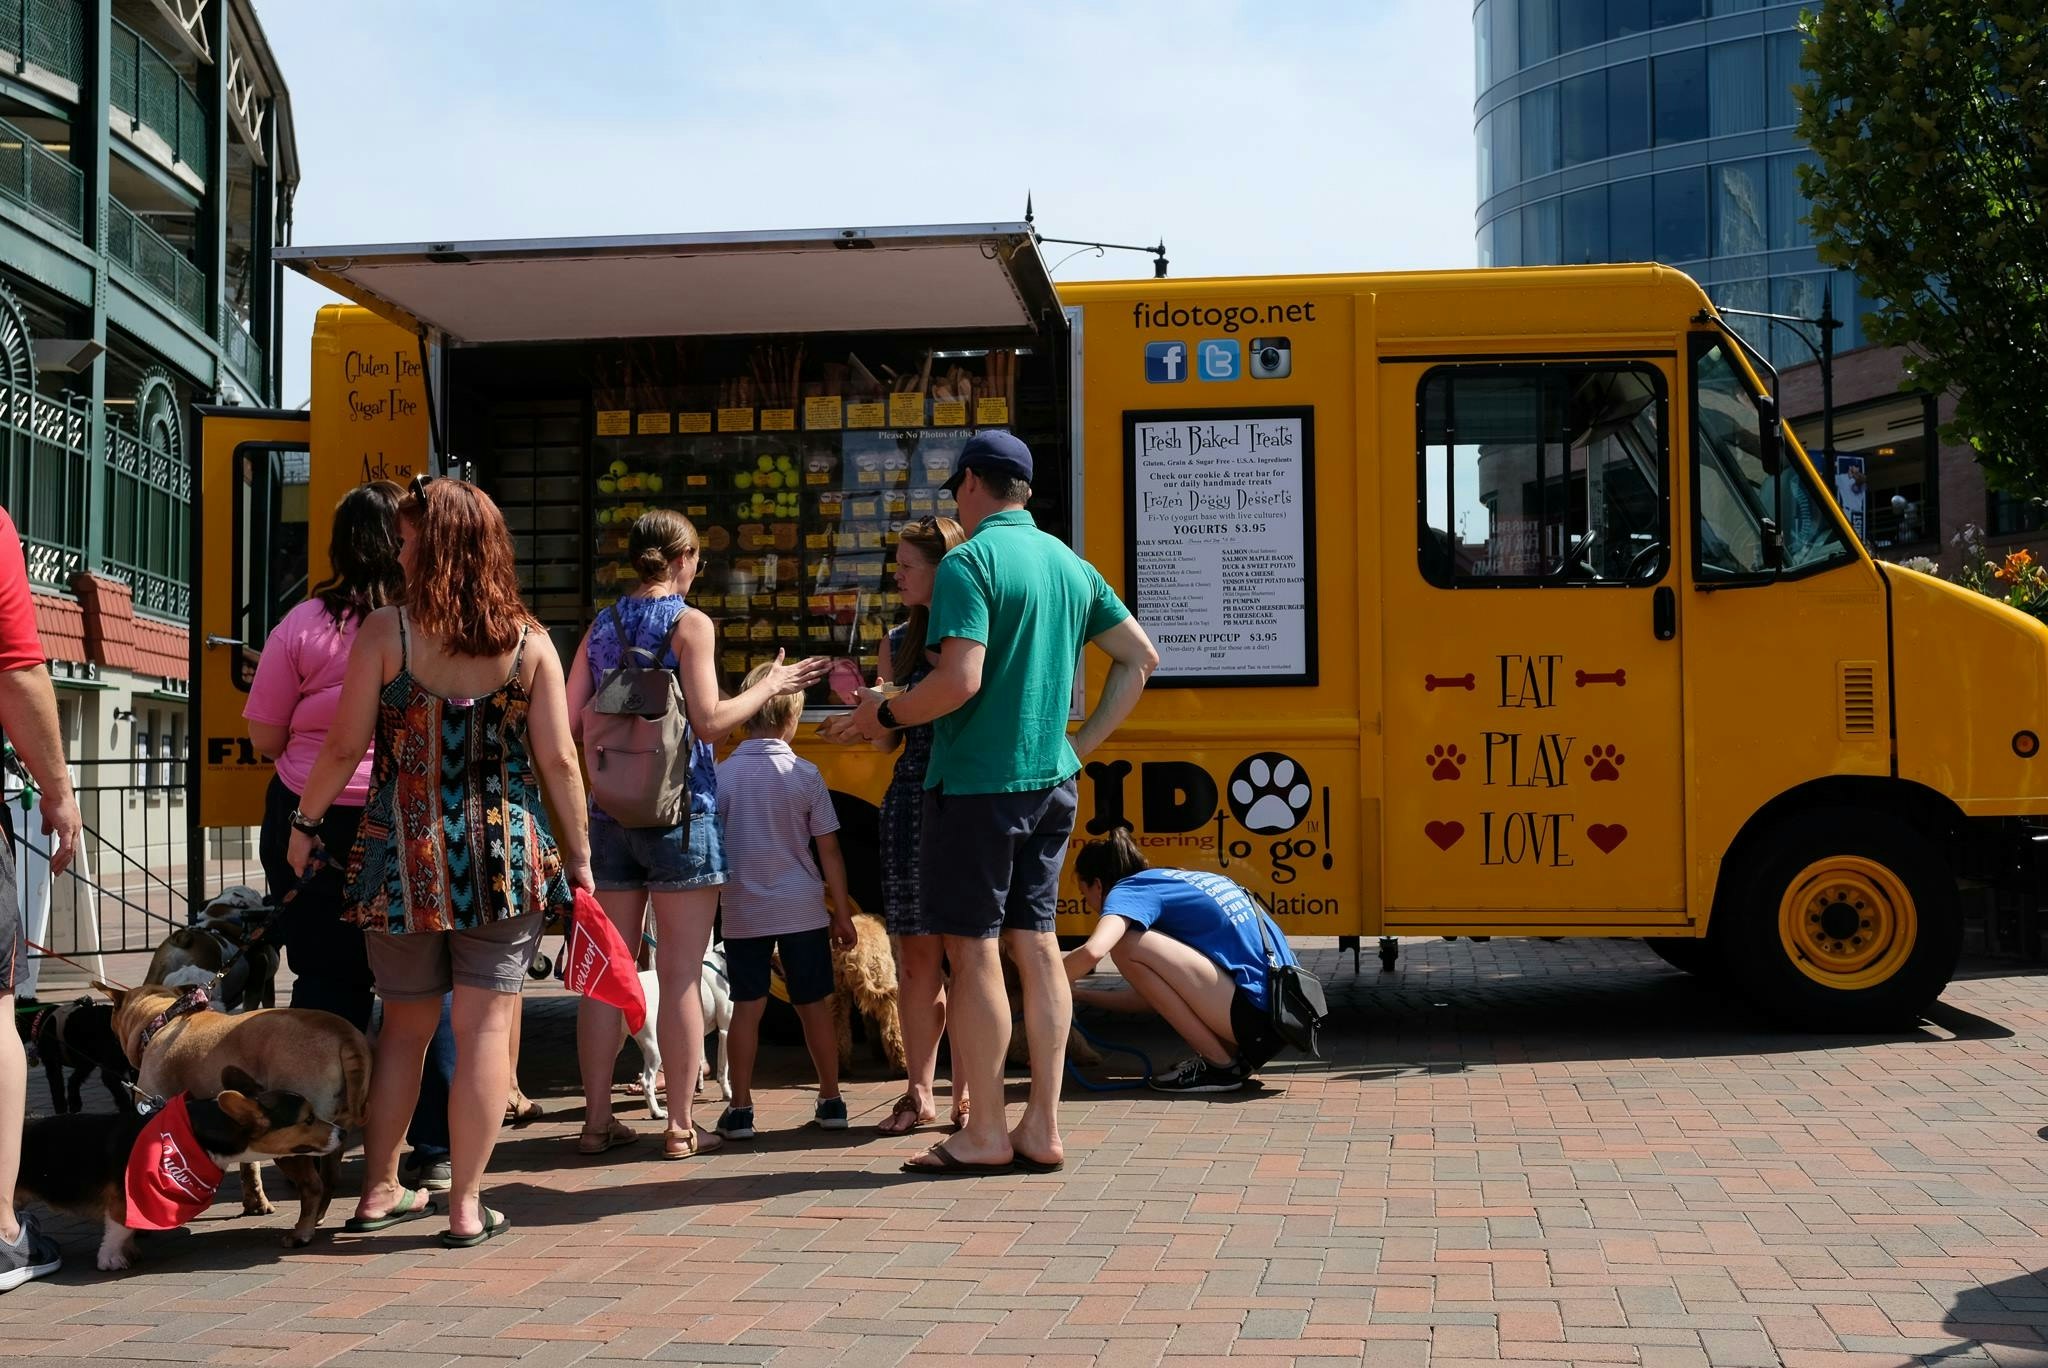 Customers and their dogs are lined up in front of the bright yellow Fido to Go Food truck.